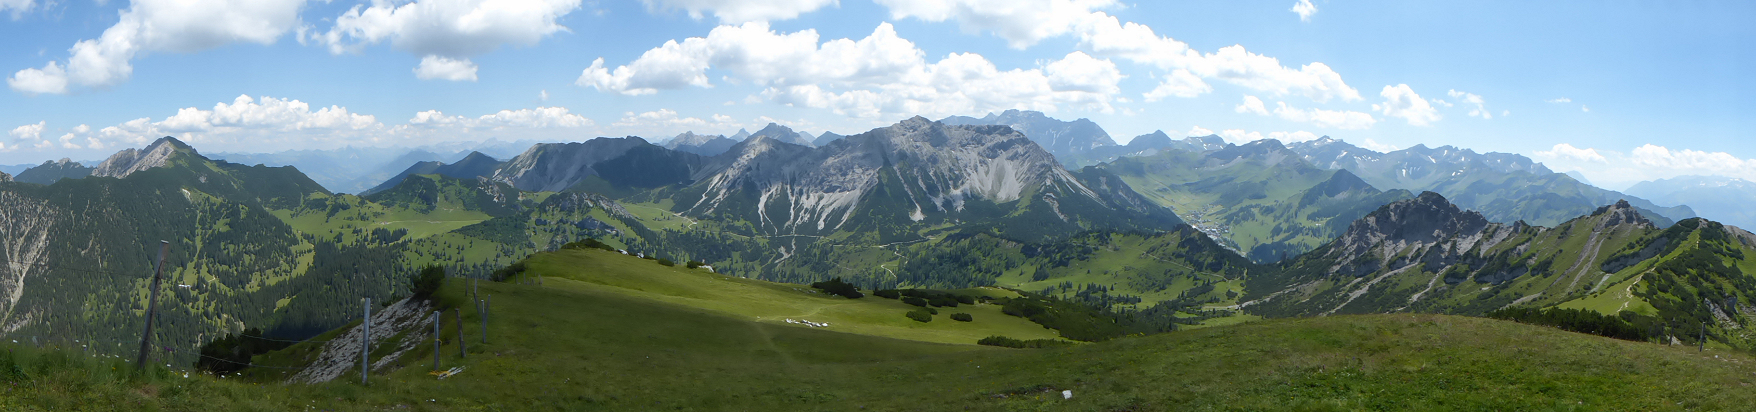 Panorama - View from Schönberg to Galinakopf (left), Ochsenkopf (Middle) and mountain range (rear right) with Augstenberg, Grauspitz and Falknis